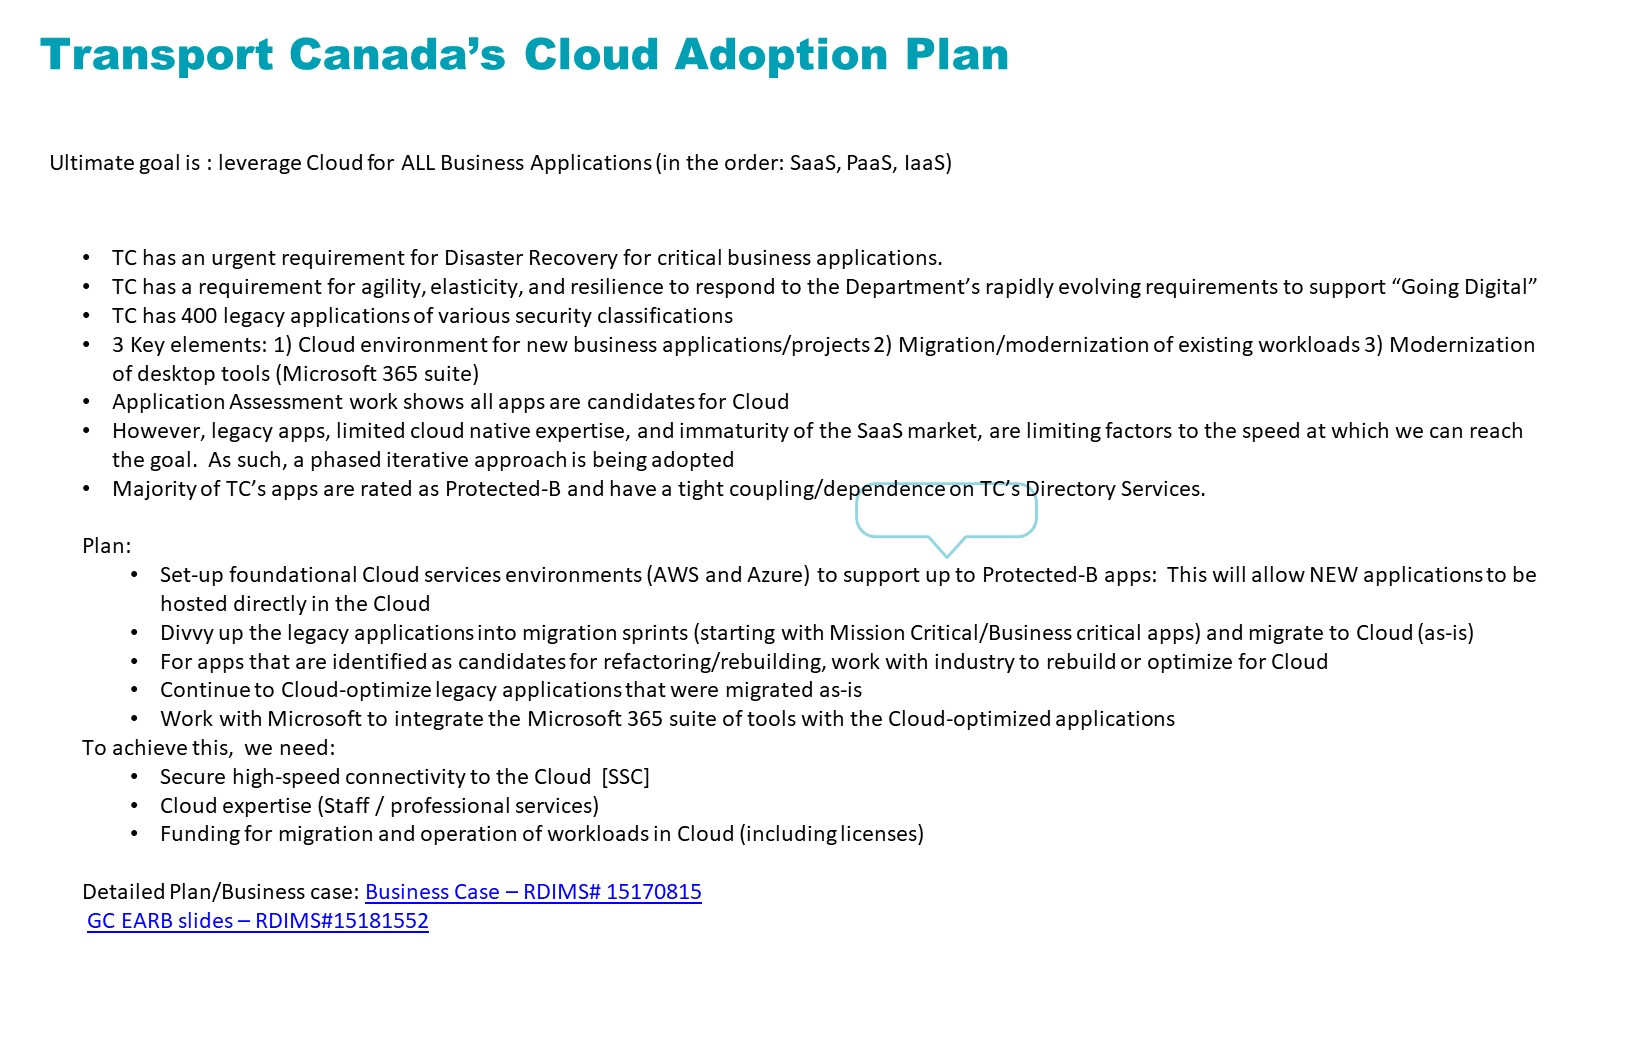 Activities and Timelines for TC's Cloud Adoption Strategy slide 2.jpg